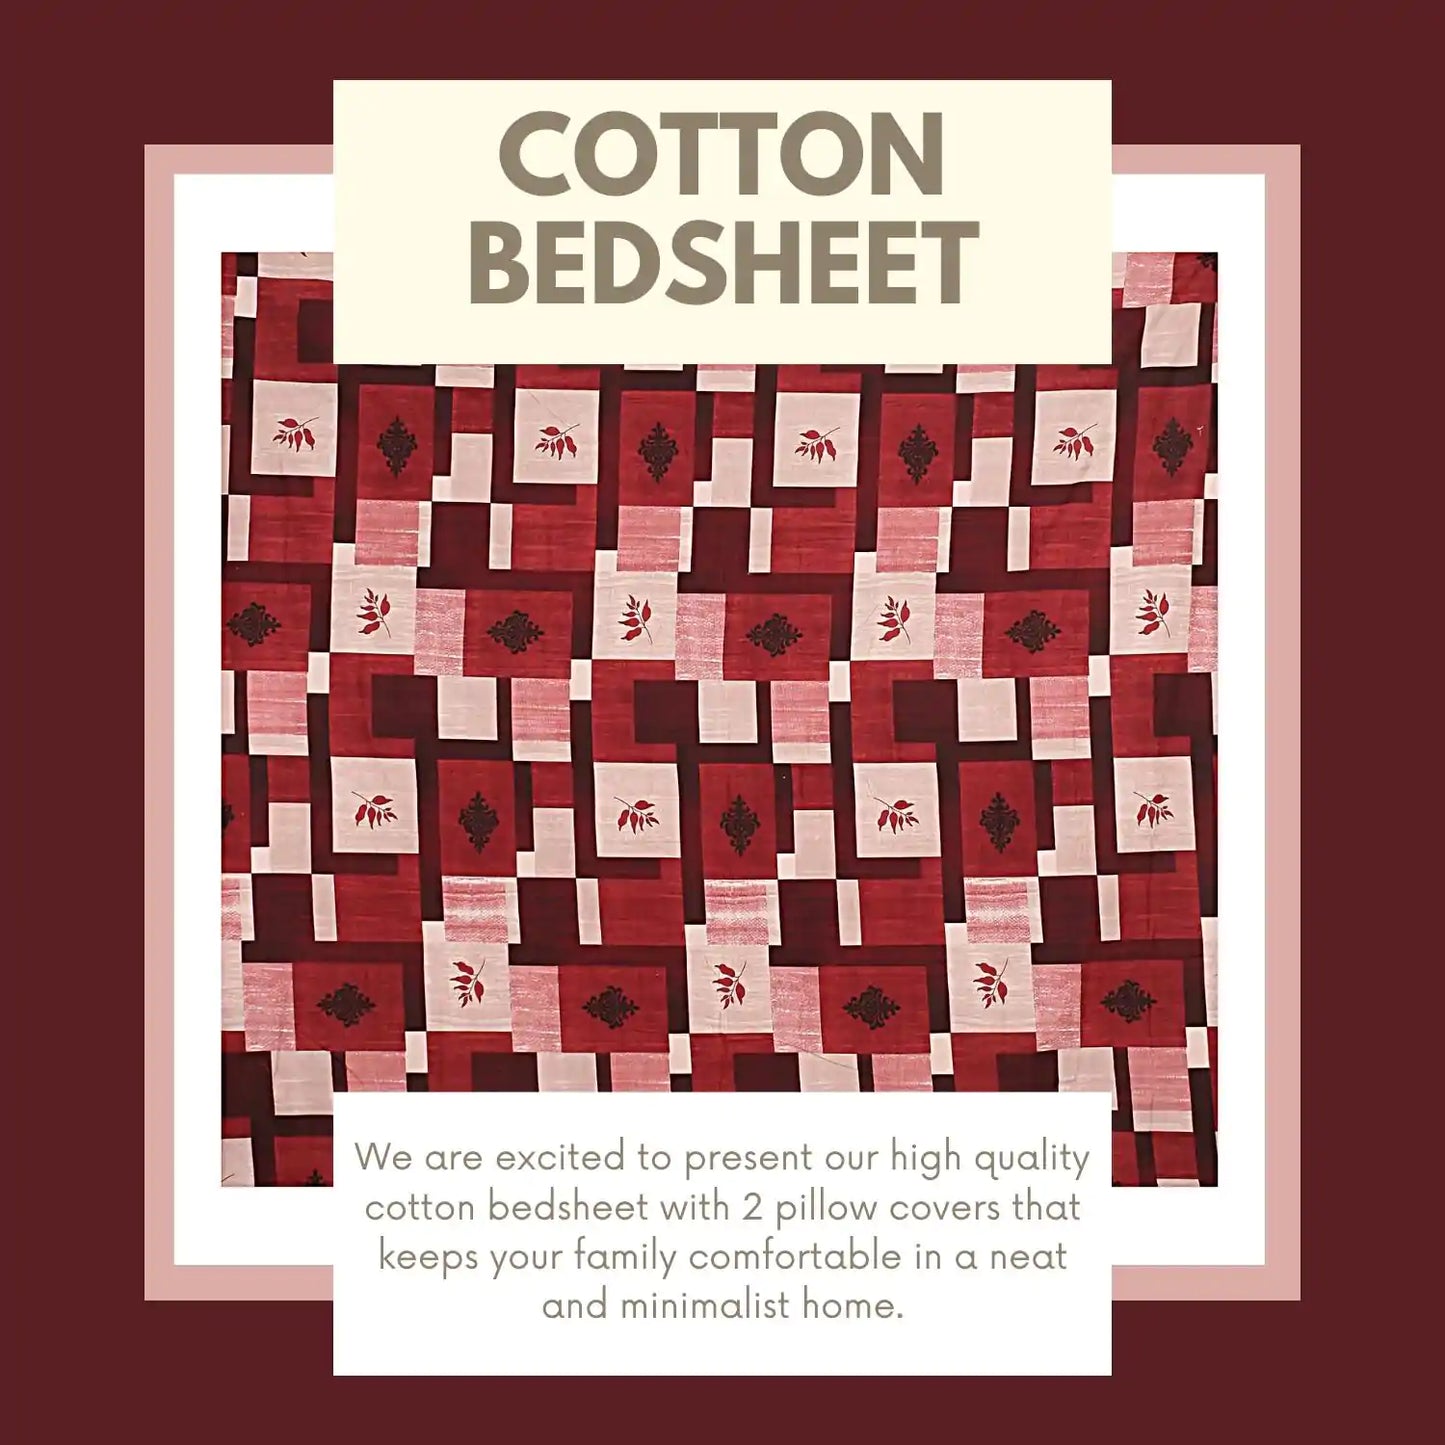 Abira Checkered Double Bed Bedsheet